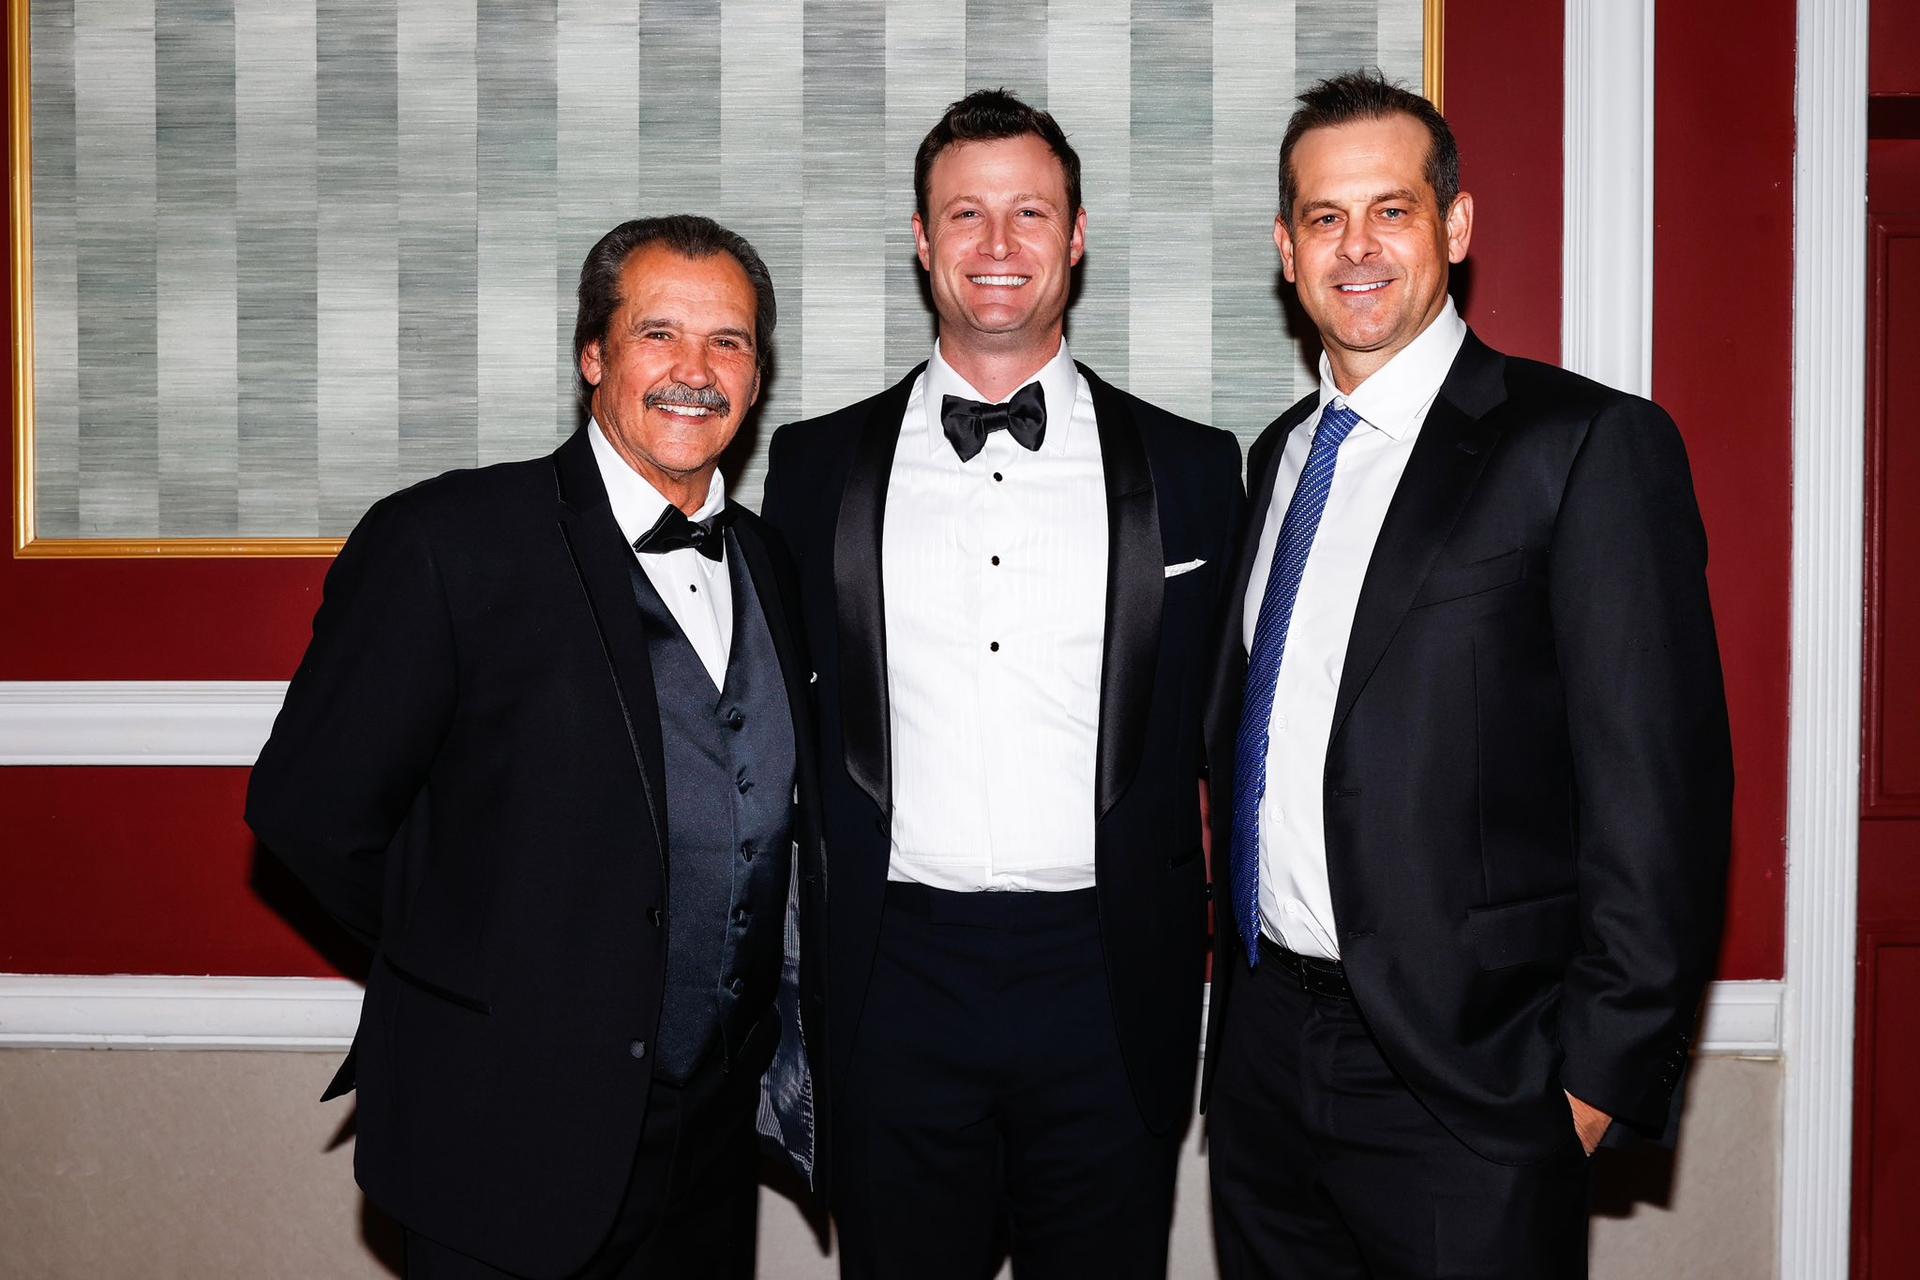 Ron Guidry, Gerrit Cole and Aaron Boone